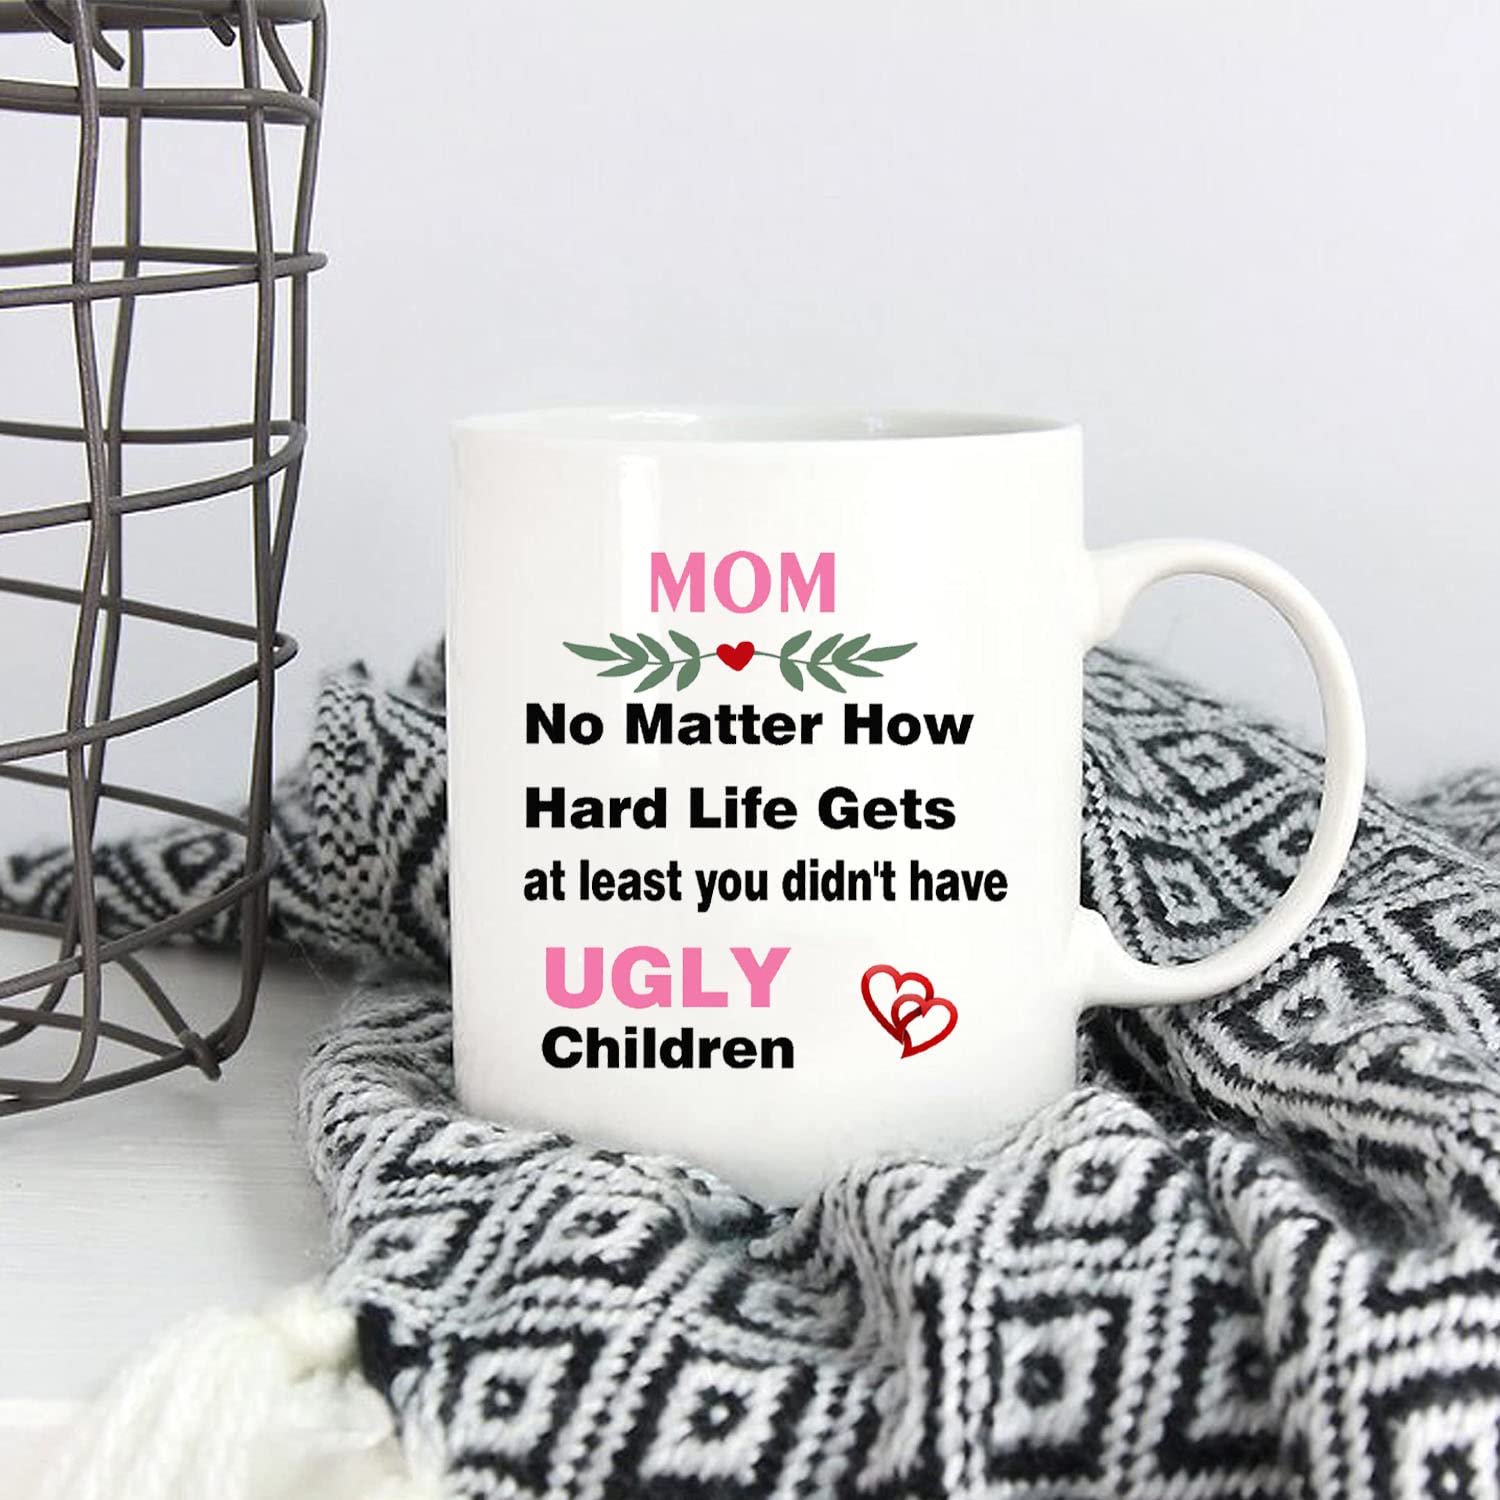 Gifts for Mom Coffee Mug, Mothers Day Gifts for Mom from Daughter Son, Birthday Gifts for Mom Fun Novelty Cup Unique Gifts Funny Mom Mug 11oz (White01)